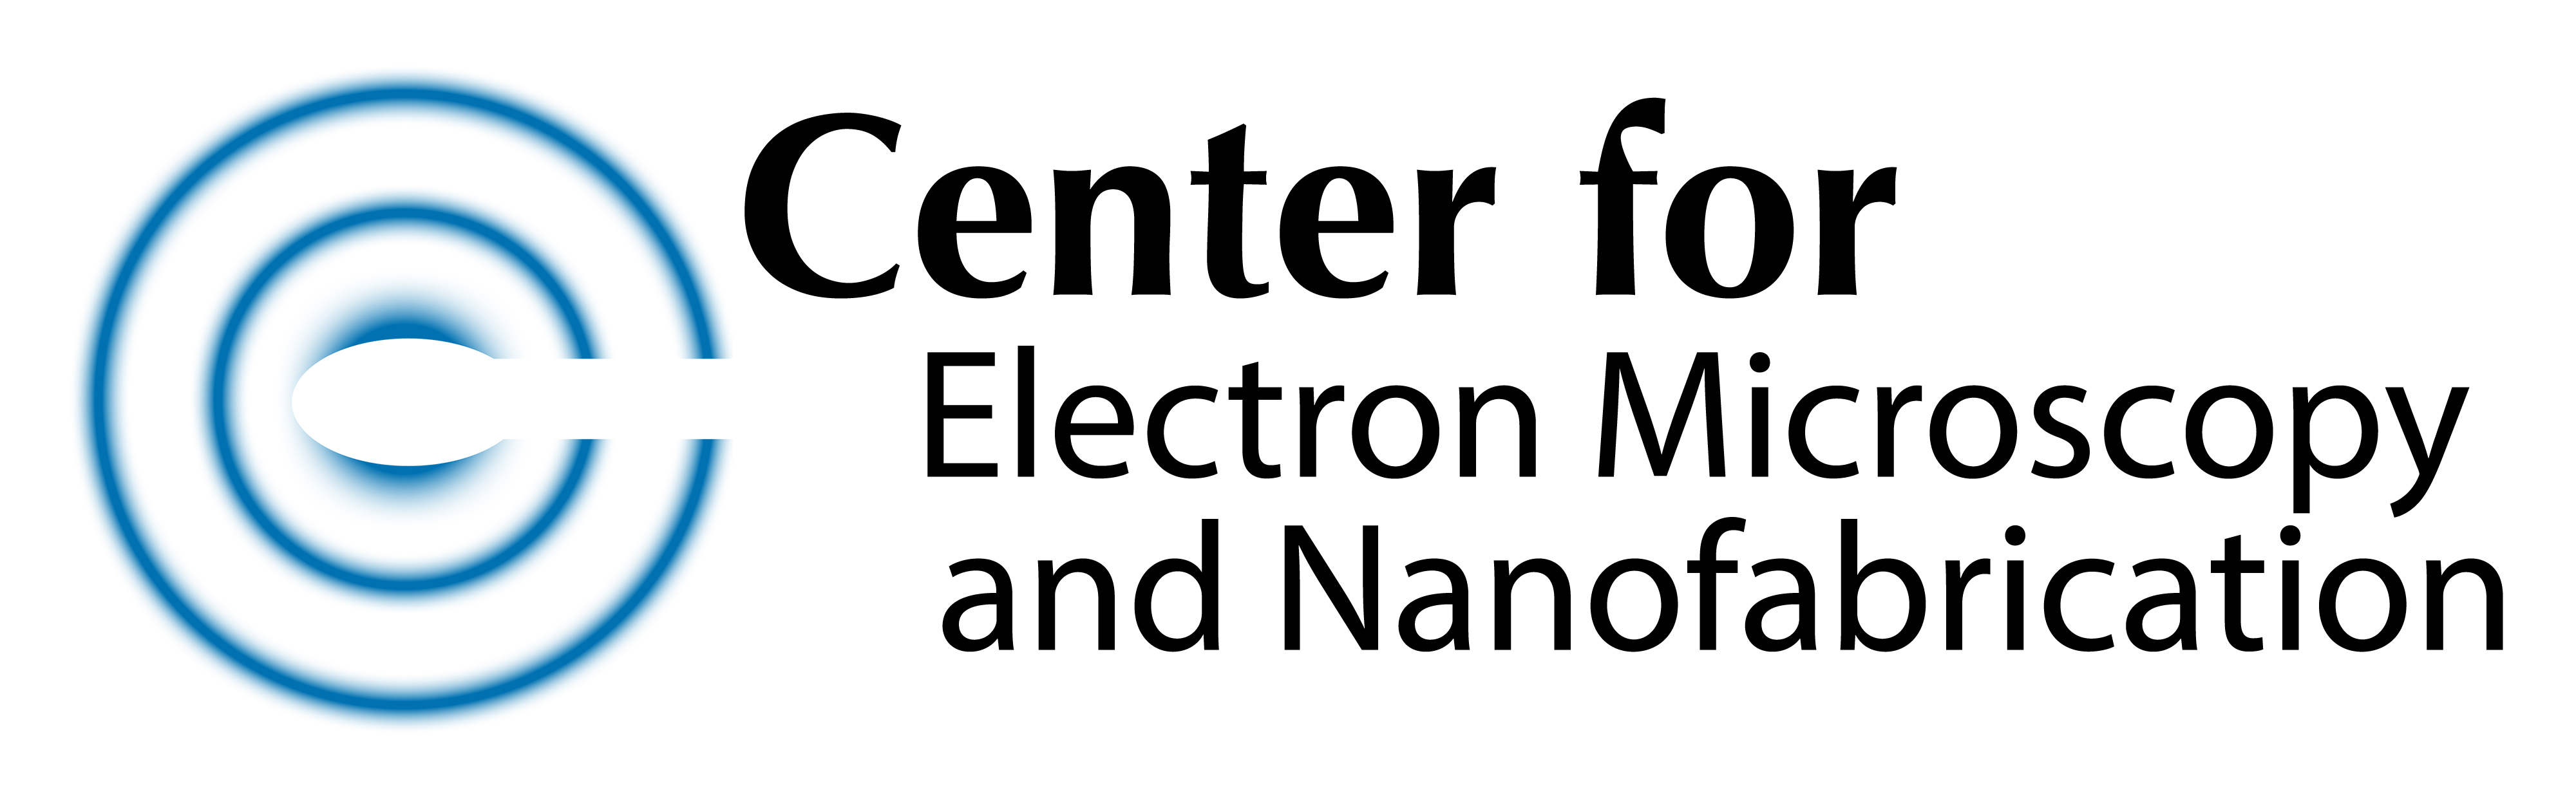 Center for Electron Microscopy and Nanofabrication